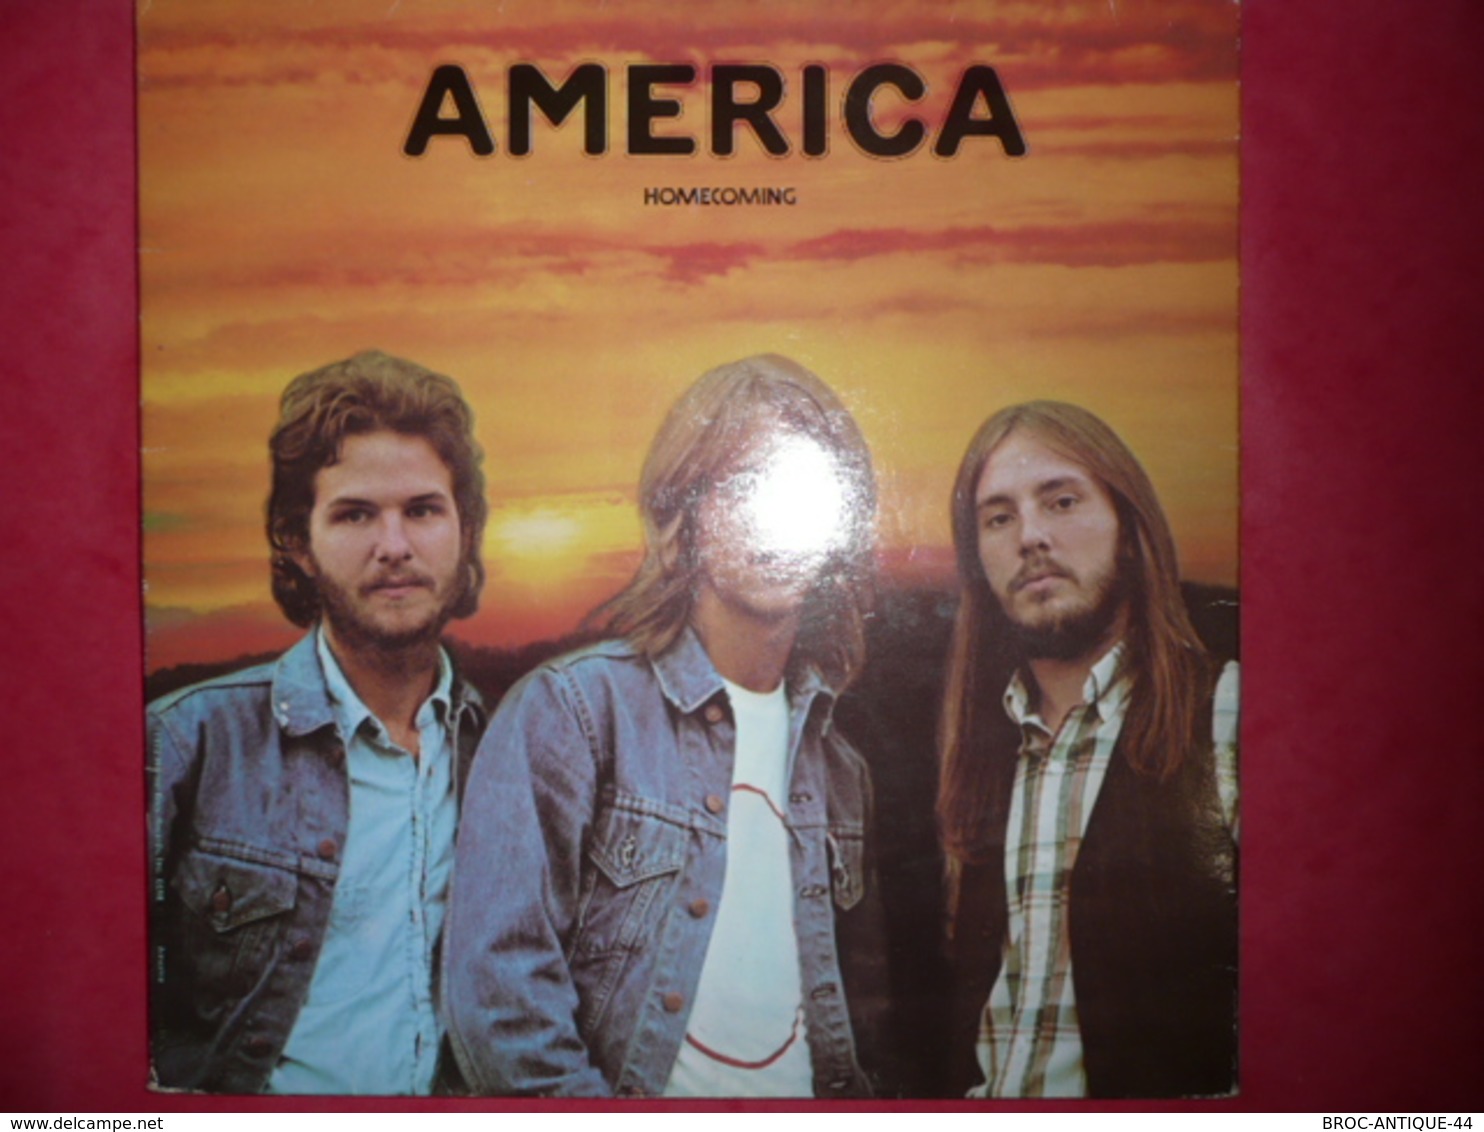 LP N°2253 - AMERICA - HOMECOMING - GRAND GROUPE - 45 T - Maxi-Single